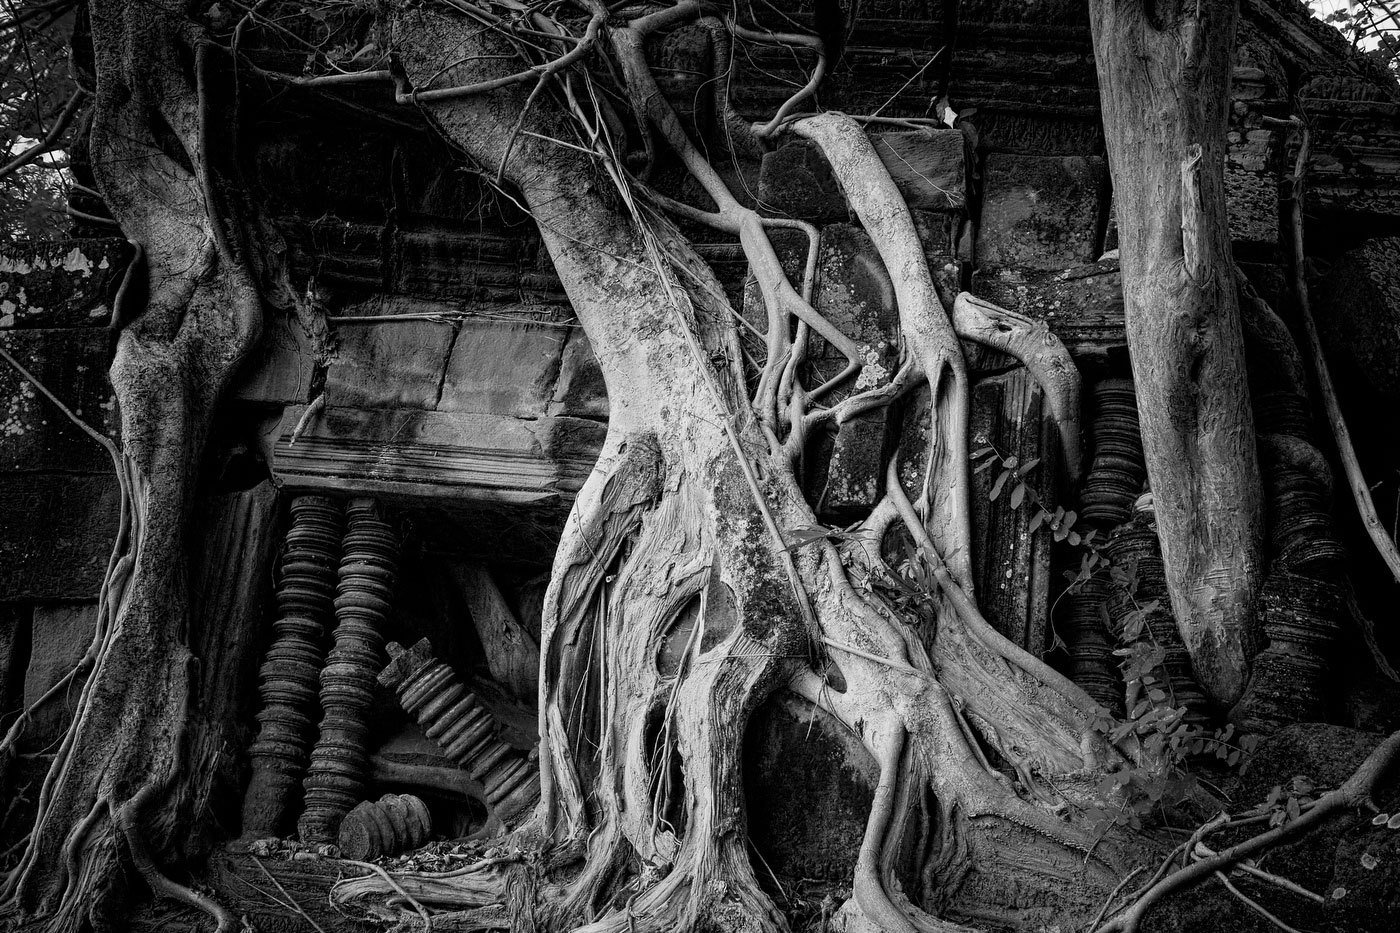  : FEATURE: The Trees of Angkor : Viviane Moos |  Documentary Photographer